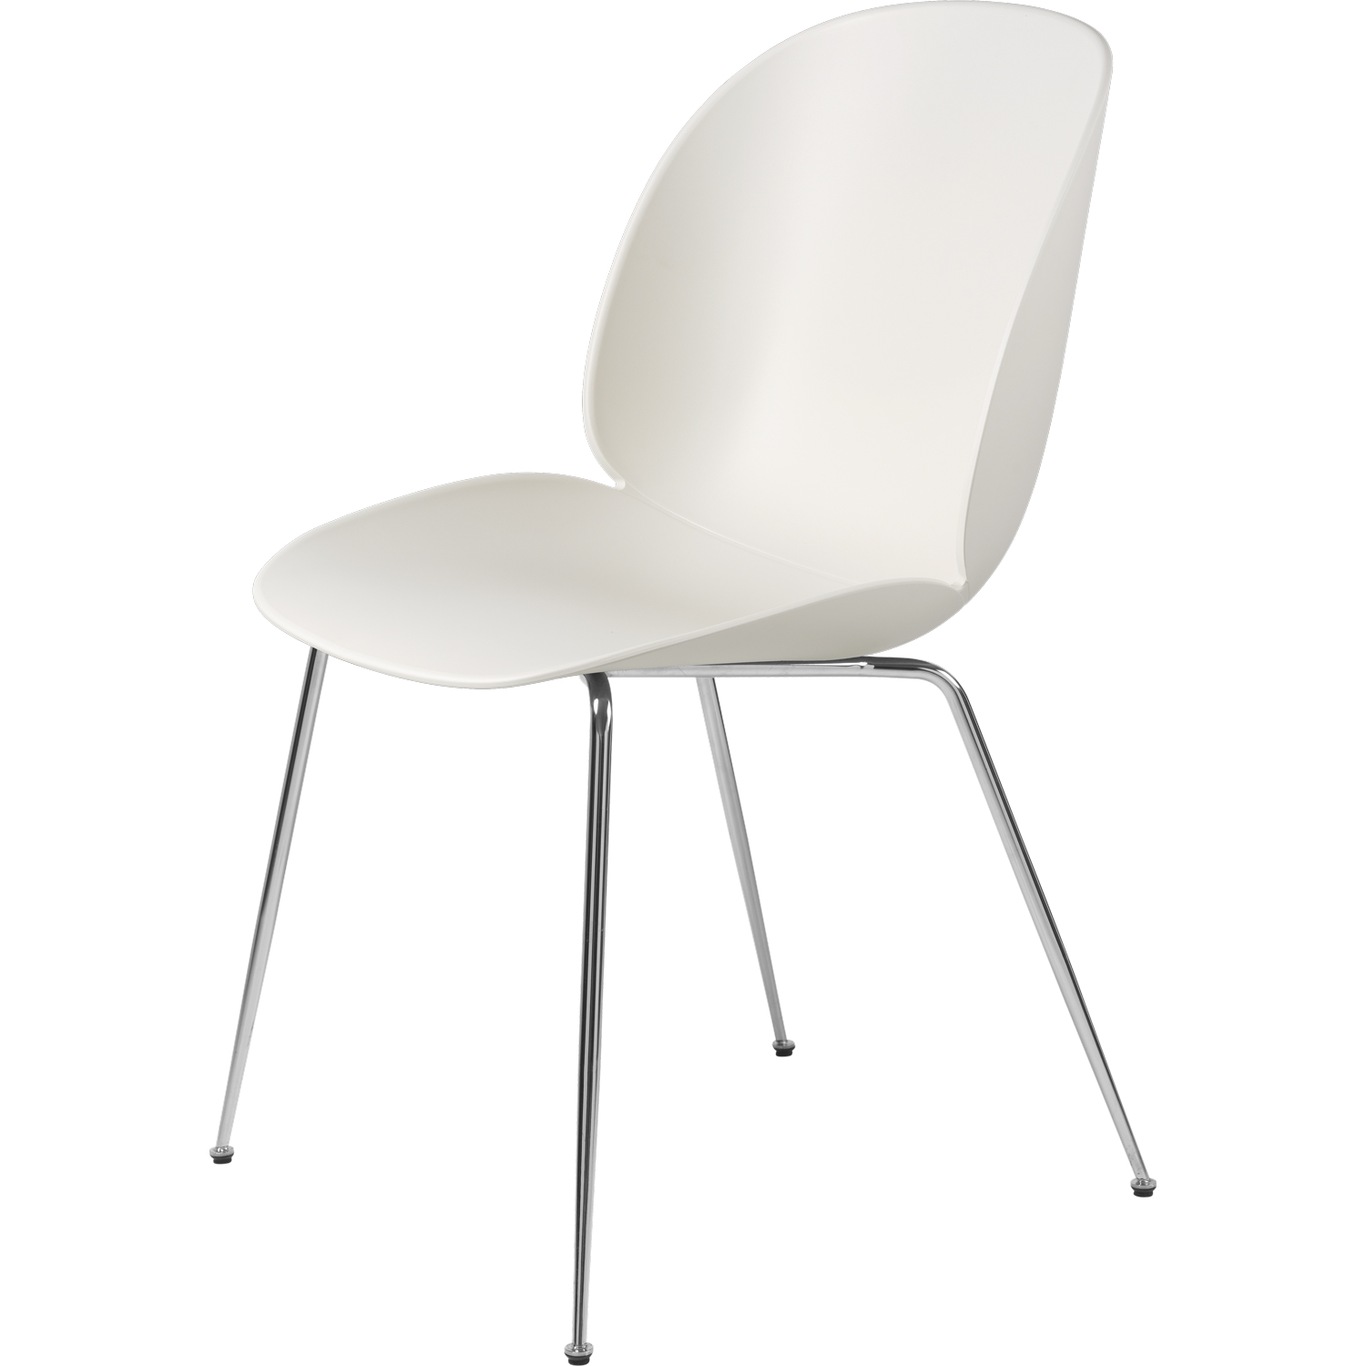 Beetle Chair Un-upholstered Conic Base Chrome, Alabaster White